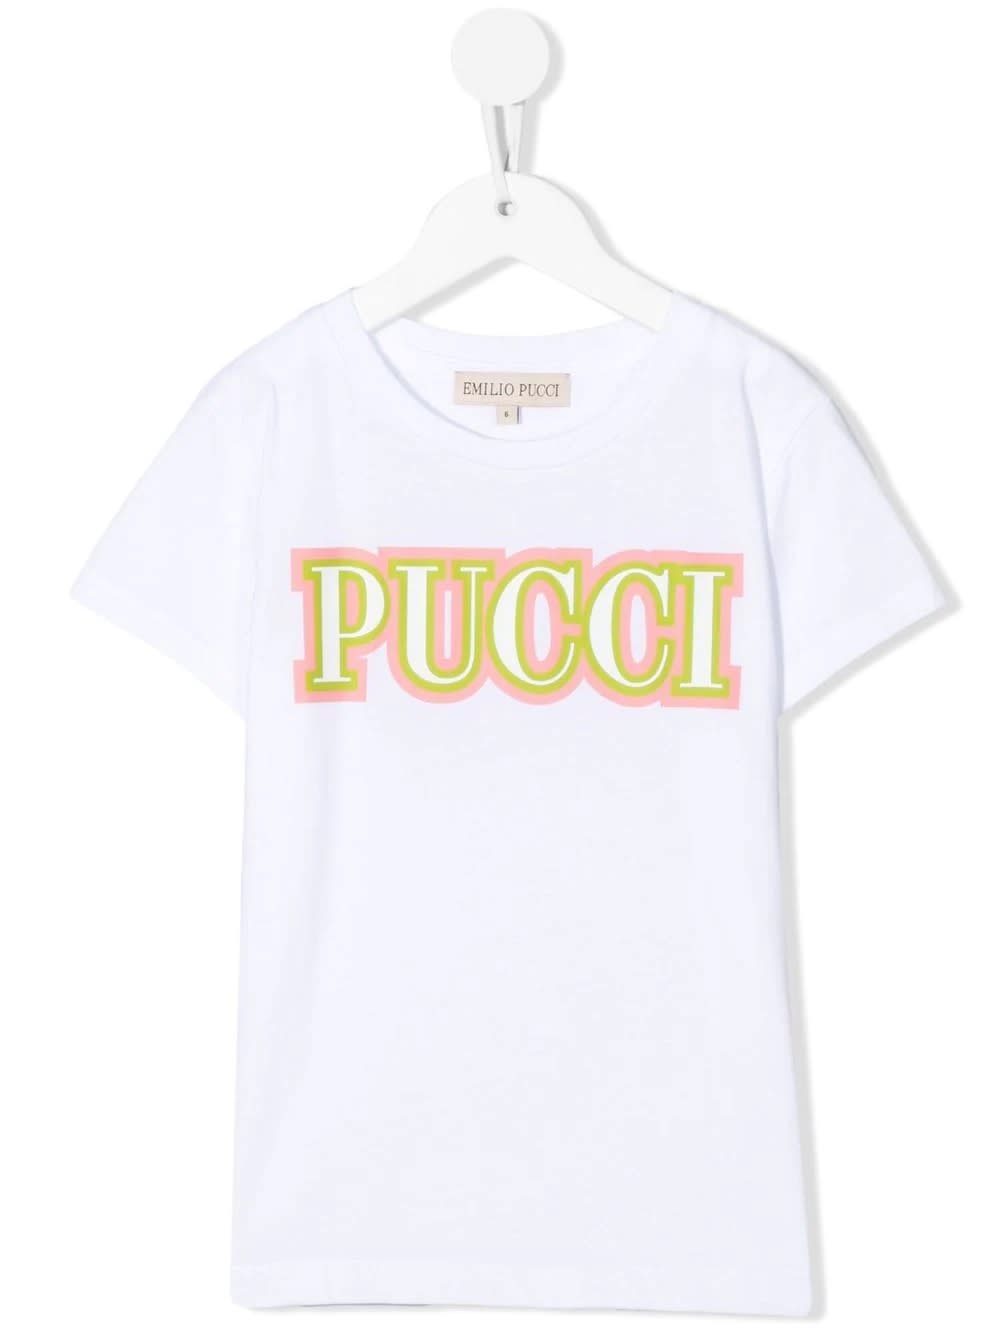 Emilio Pucci Kids White T-shirt With Old School pucci Print